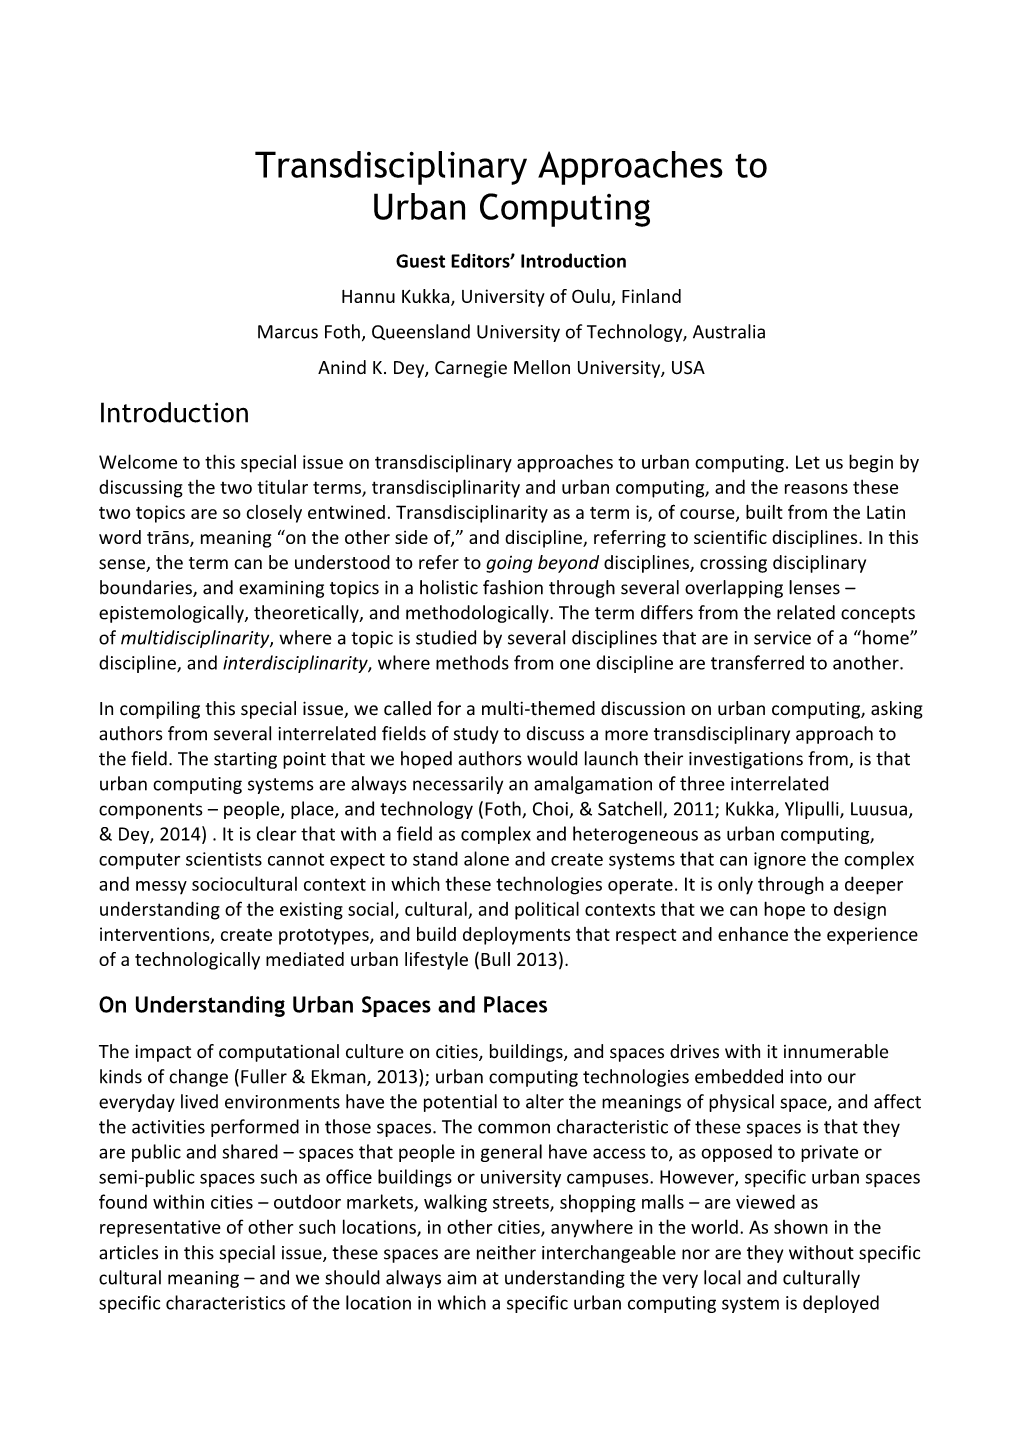 Transdisciplinary Approaches to Urban Computing